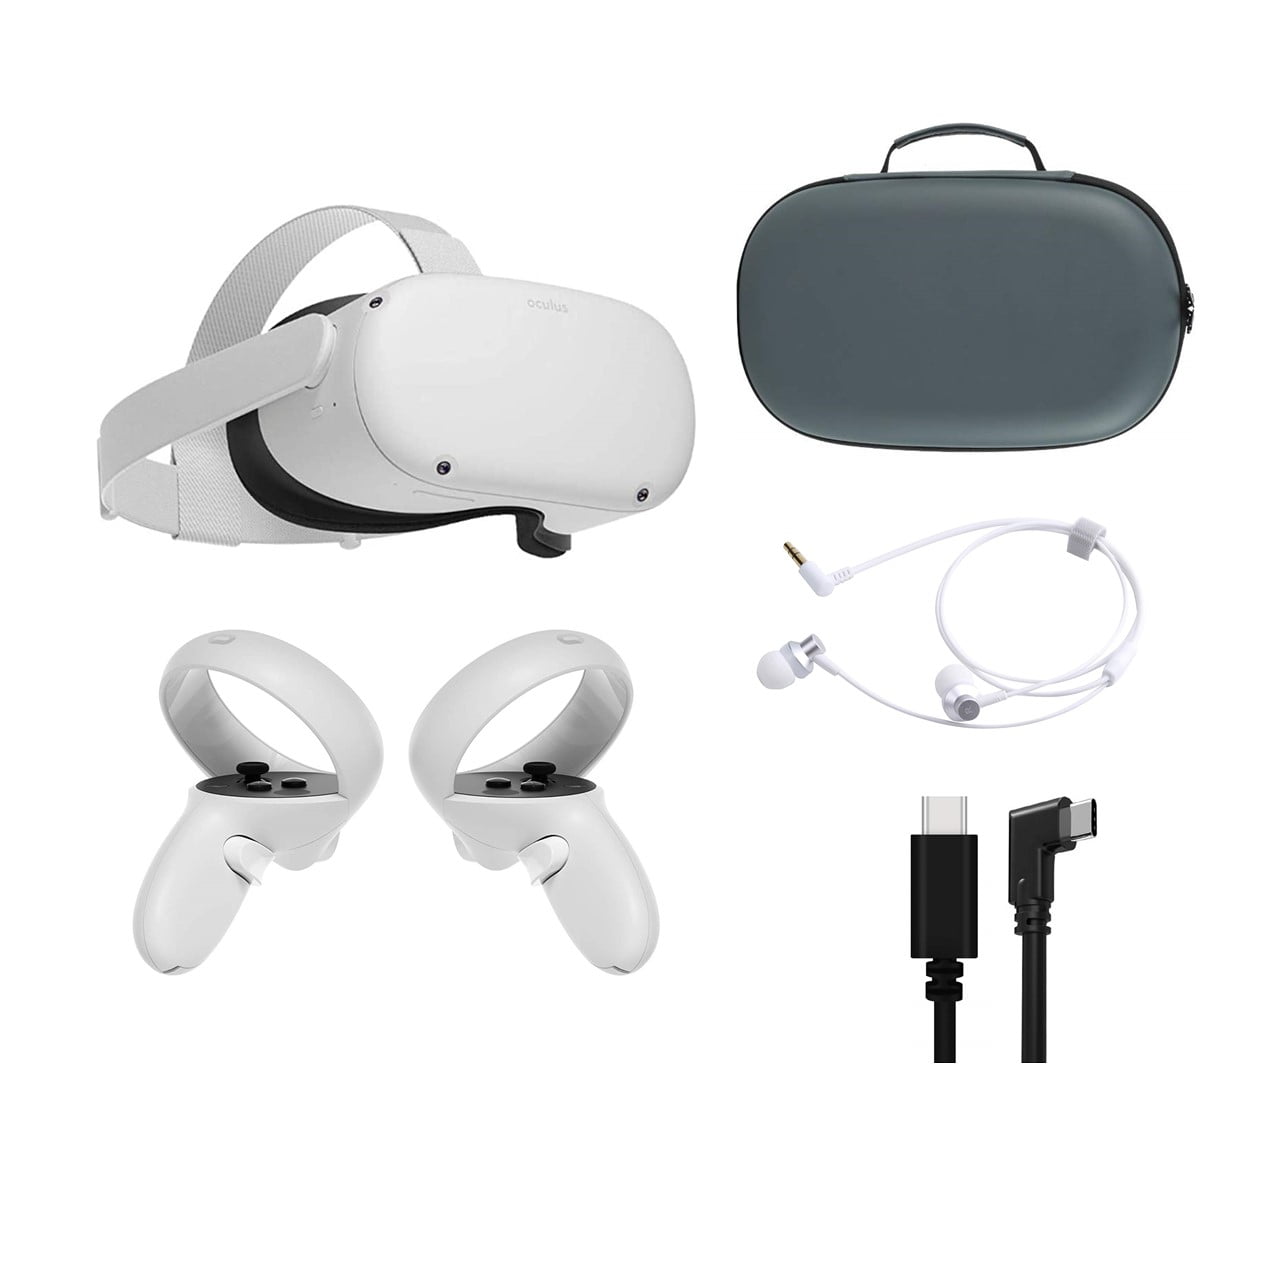 2020 Oculus Quest 2 All-In-One VR Headset, Touch Controllers, 256GB SSD,  1832x1920 up to 90 Hz Refresh Rate LCD, Glasses Compatible, 3D Audio,  Mytrix 